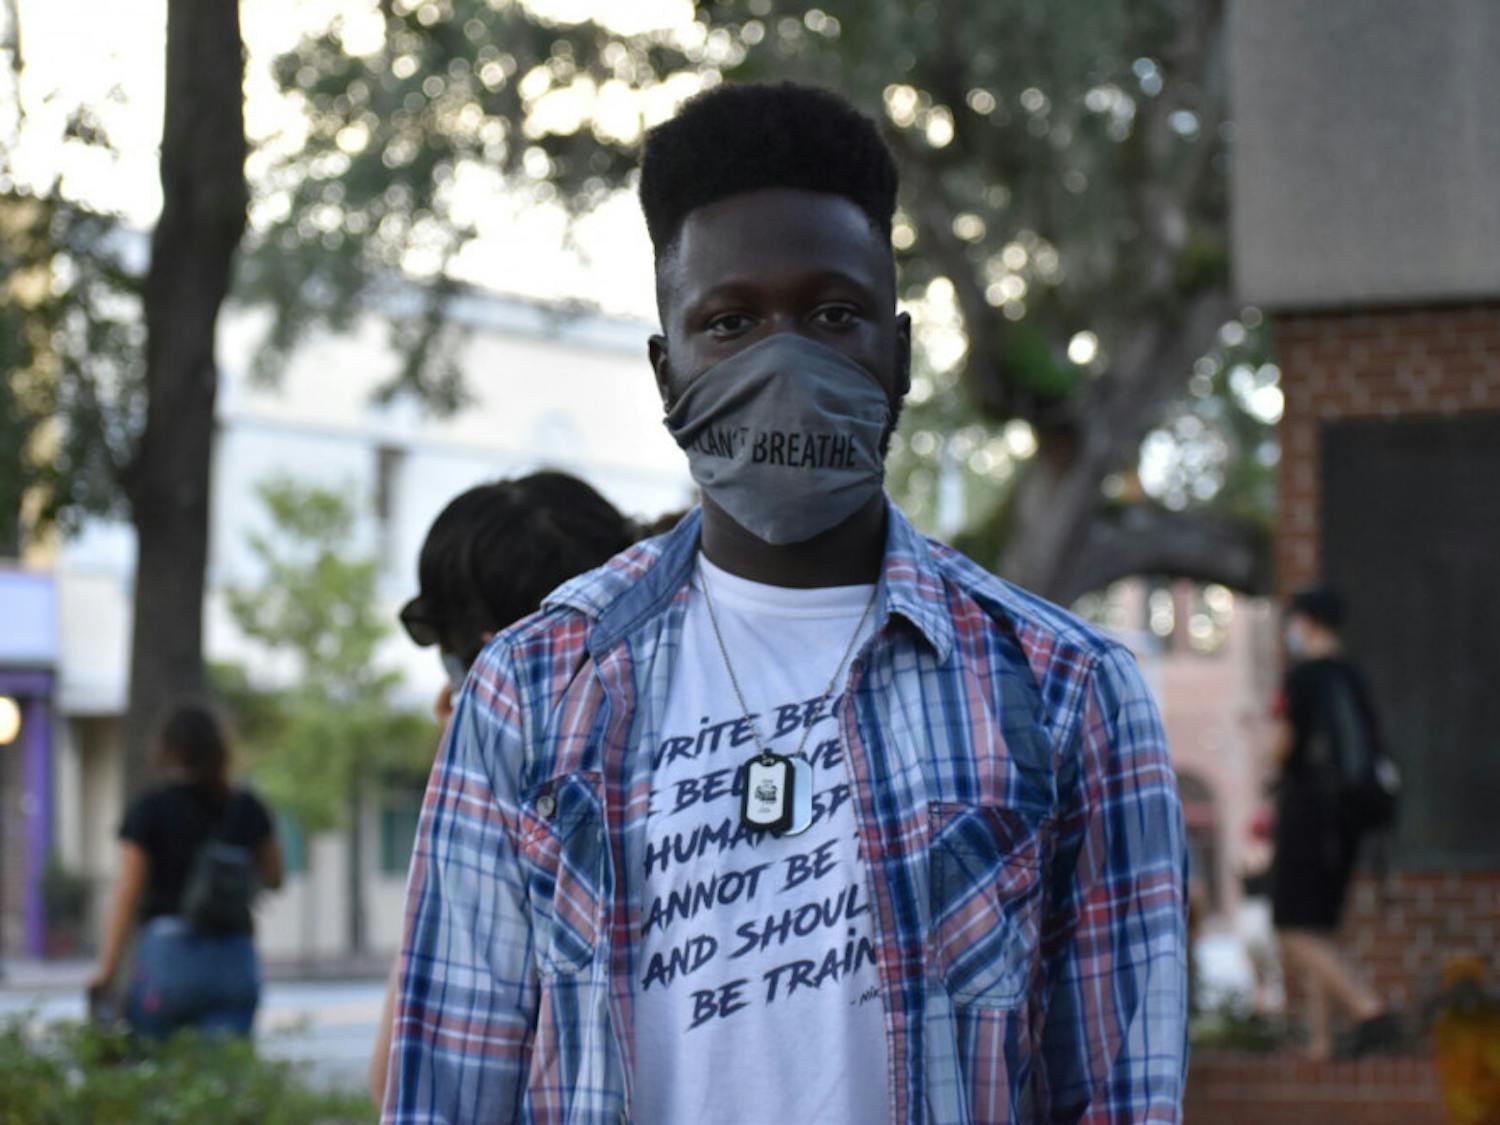 Brandon McKay wore a mask that read “I can’t breathe.” He said it’s a reflection of the Black community’s struggle.